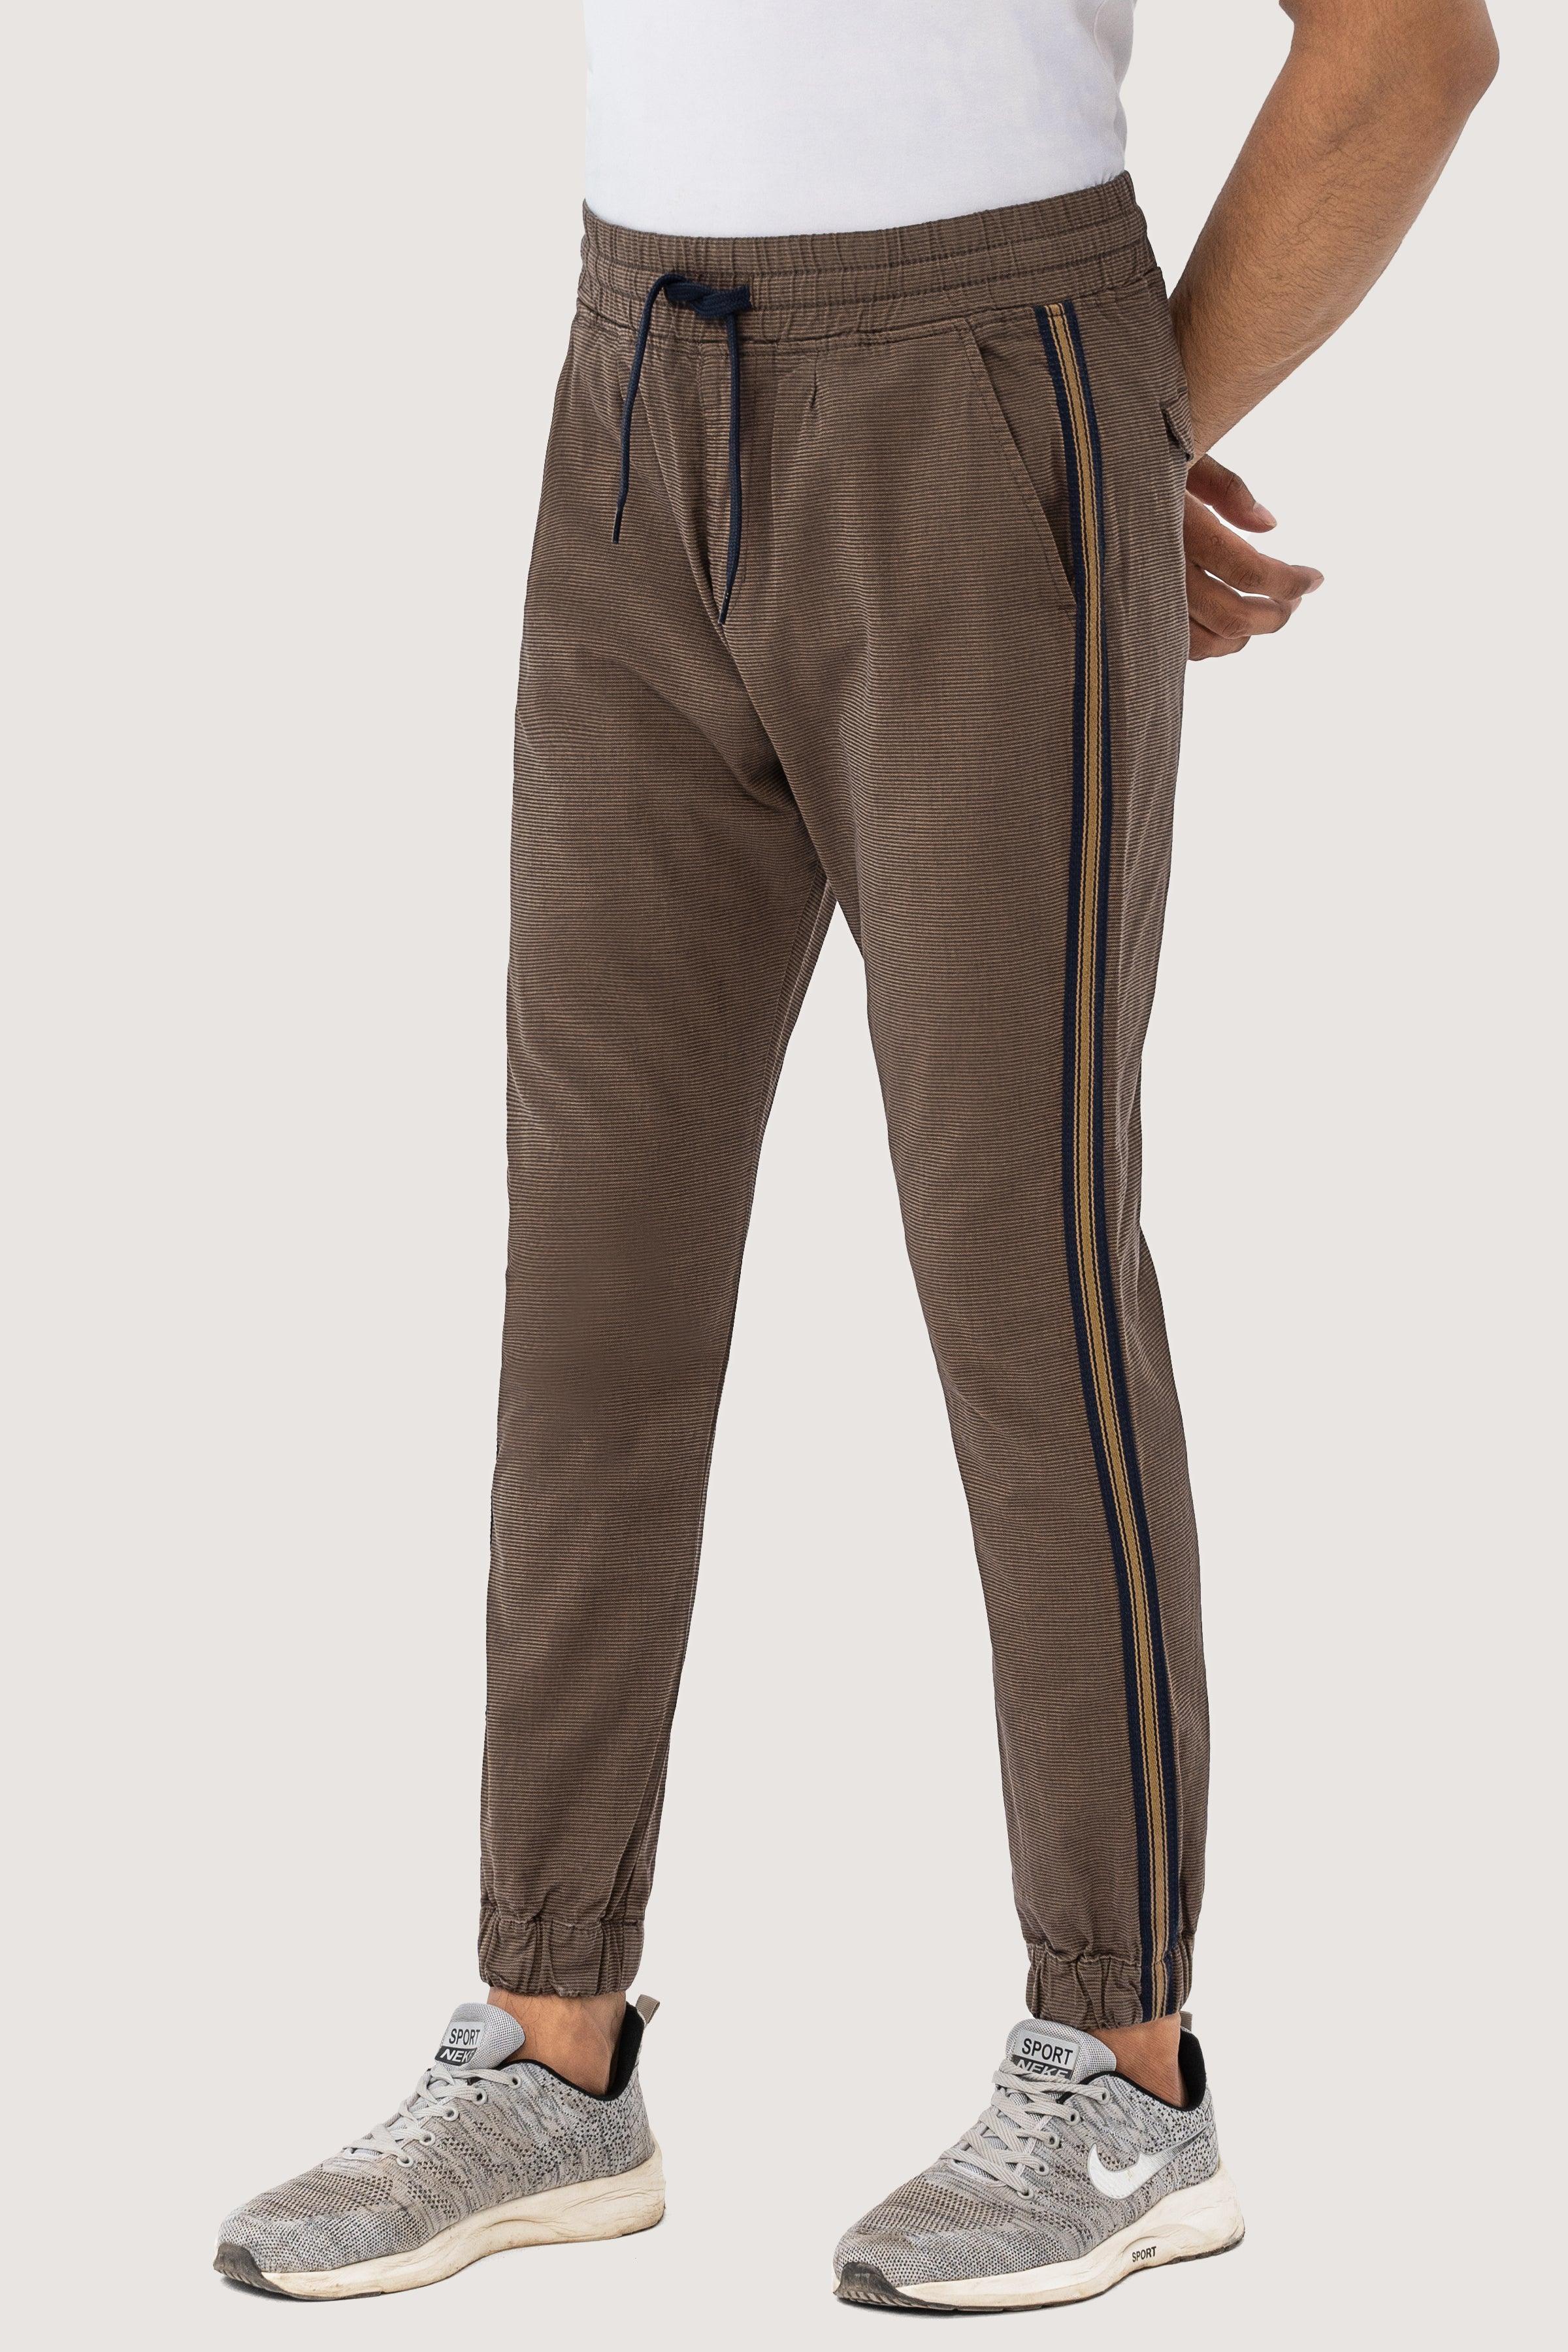 SELF TEXTURED CONTRAST TAPE TROUSER DARK KHAKI at Charcoal Clothing